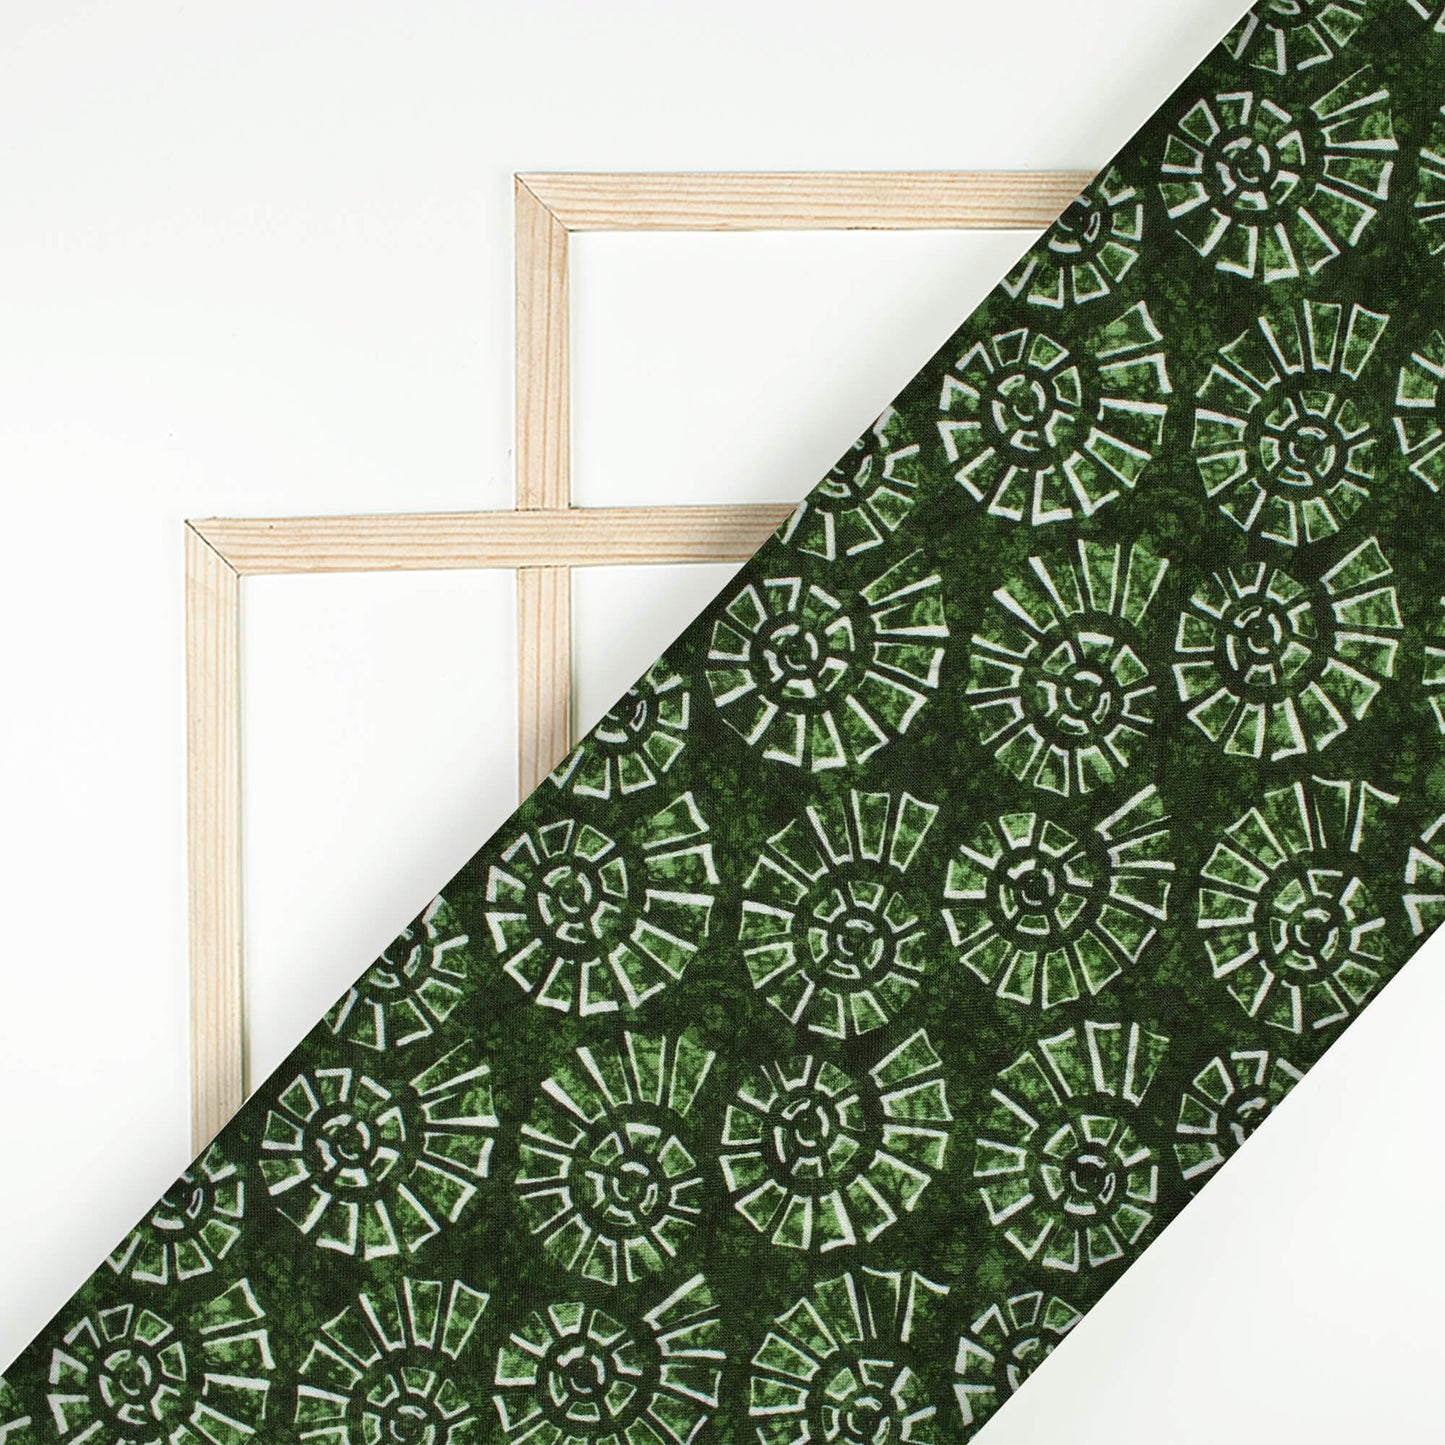 Forest Green Geometric Pattern Digital Print Linen Textured Fabric (Width 56 Inches)